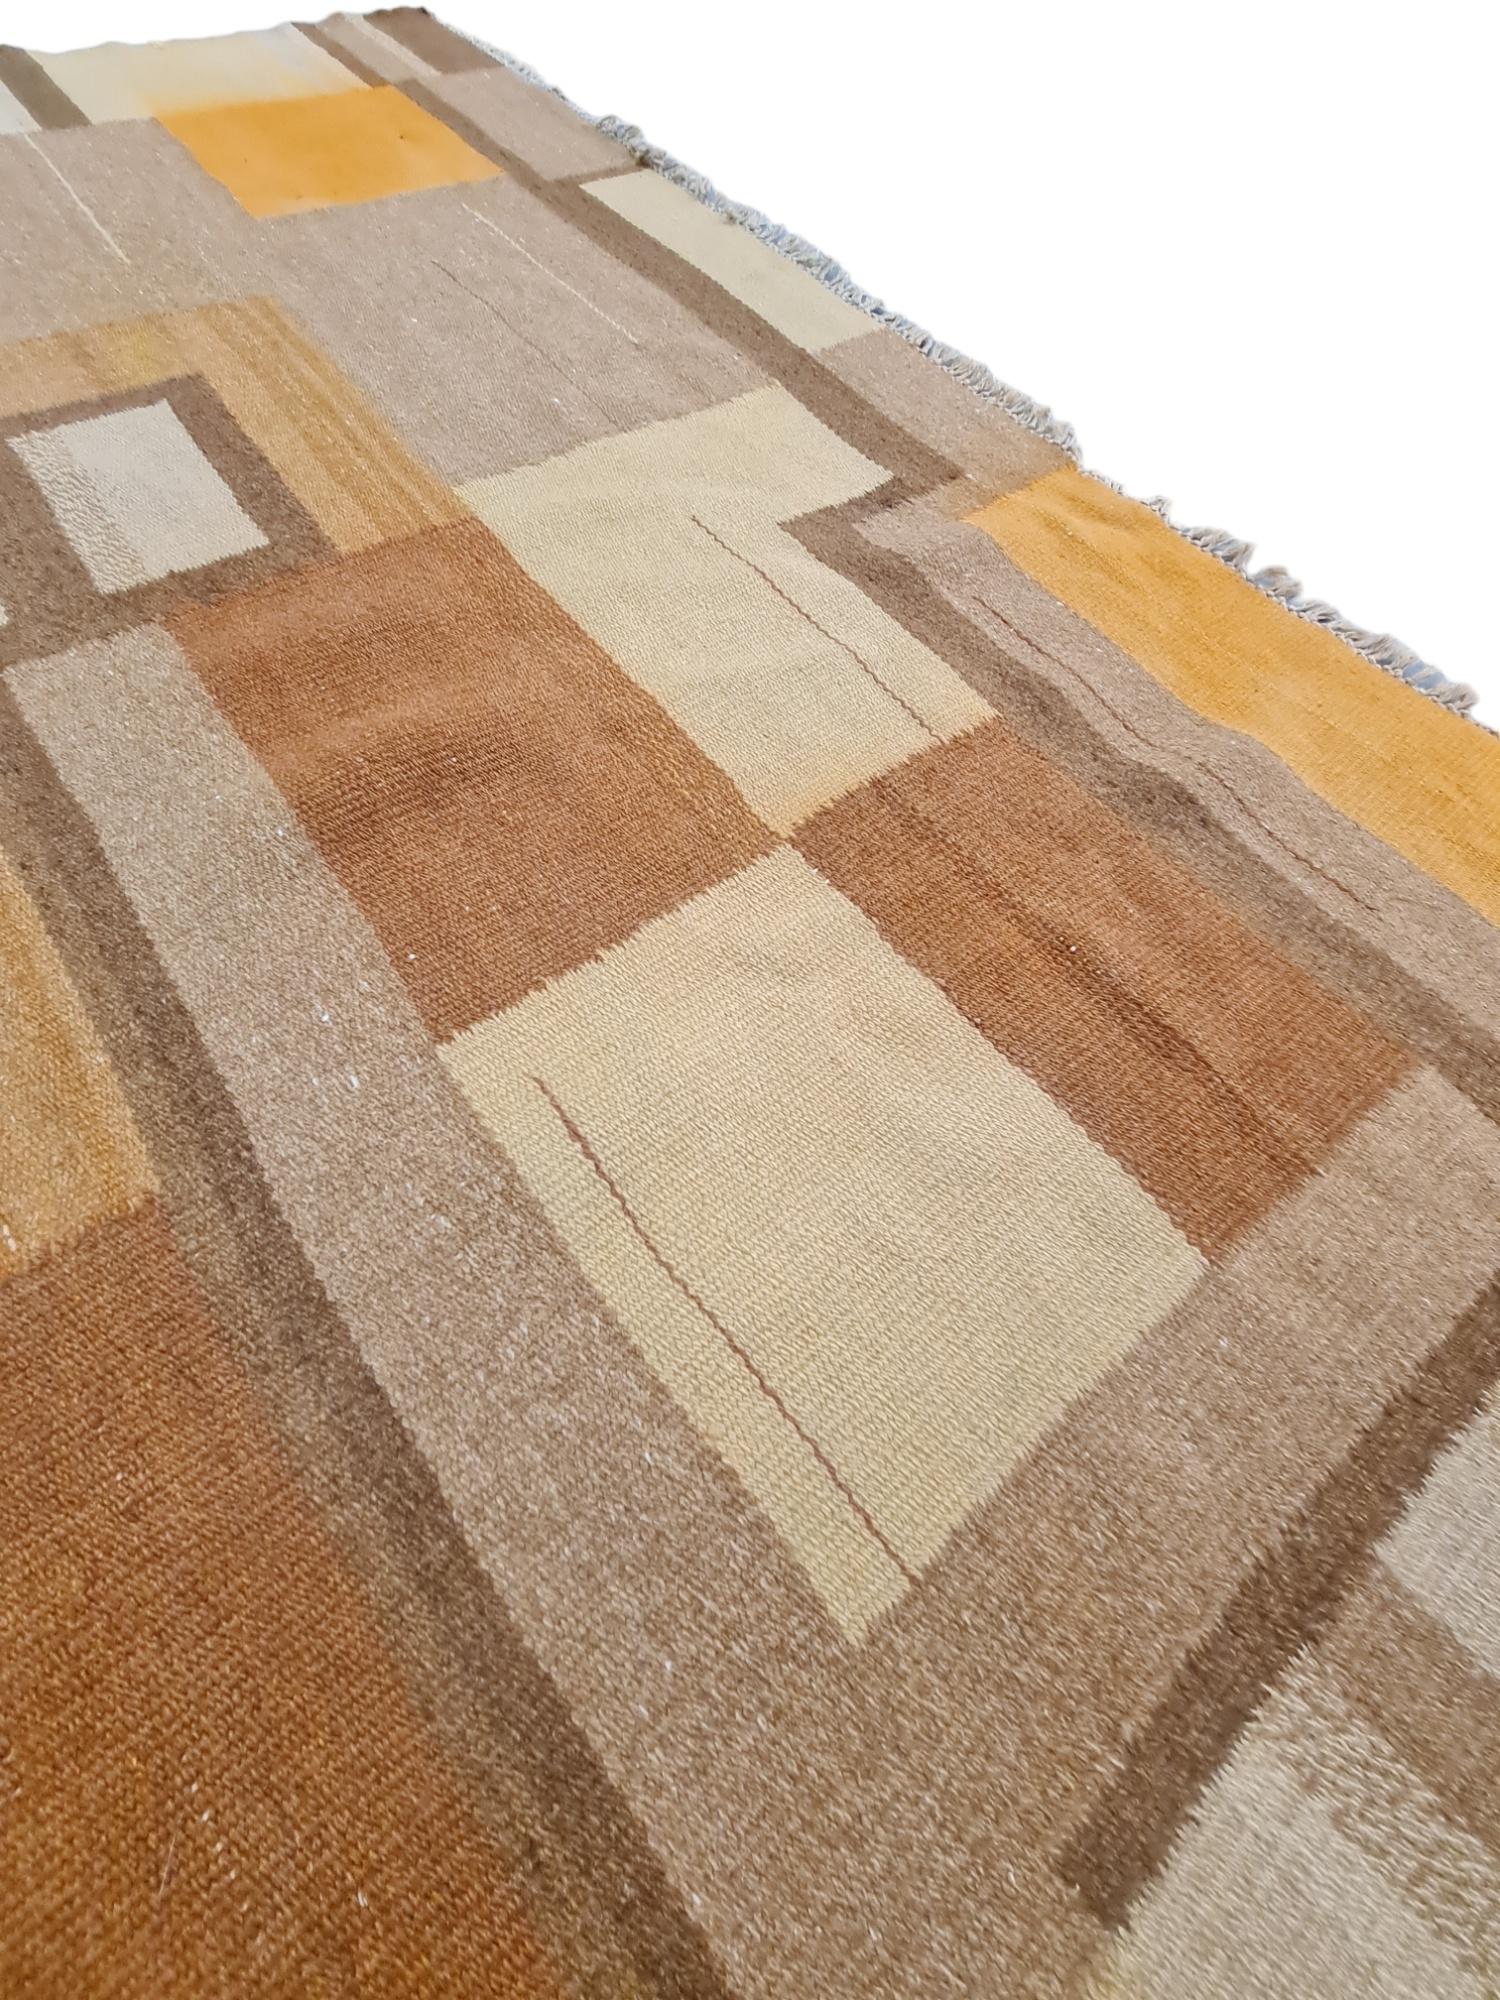 20th Century Finnish Flat-Weave Carpet, 1930s For Sale